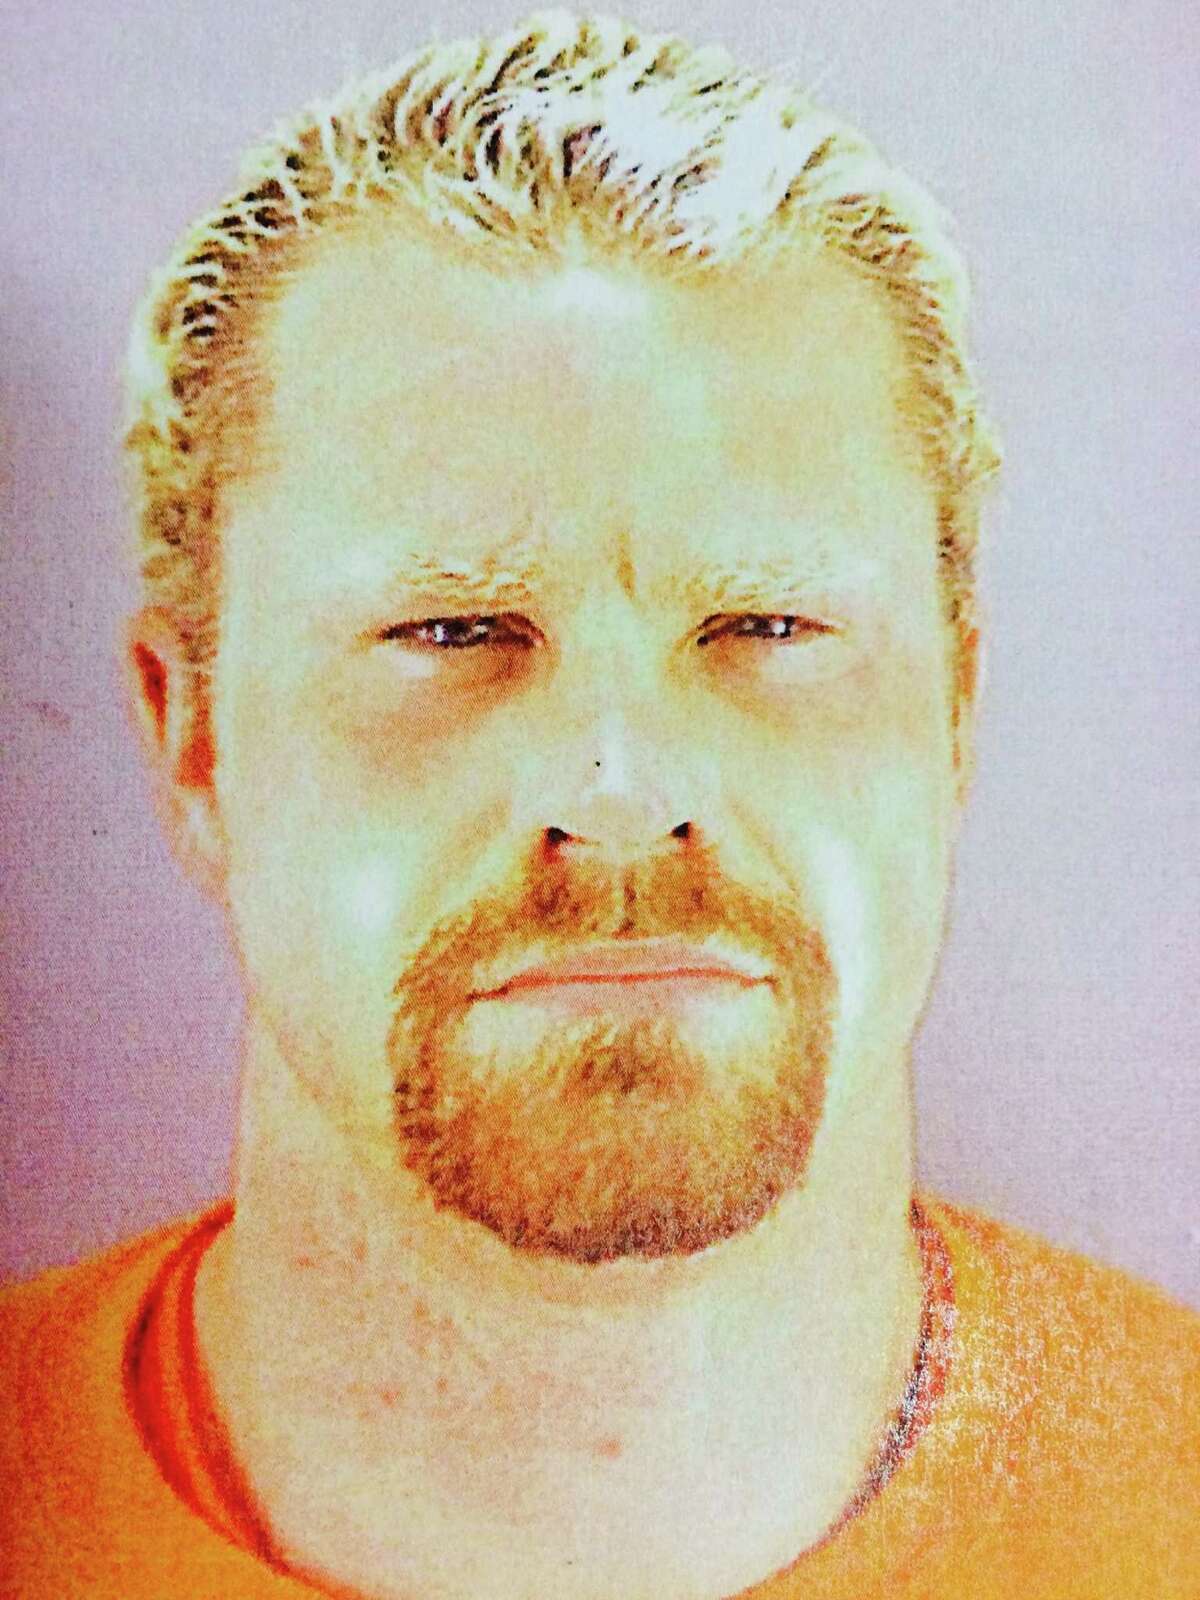 Police arrested Jackson Van Deusen, 39, of San Francisco, on Friday in the stabbing death of a man in the Outer Sunset.